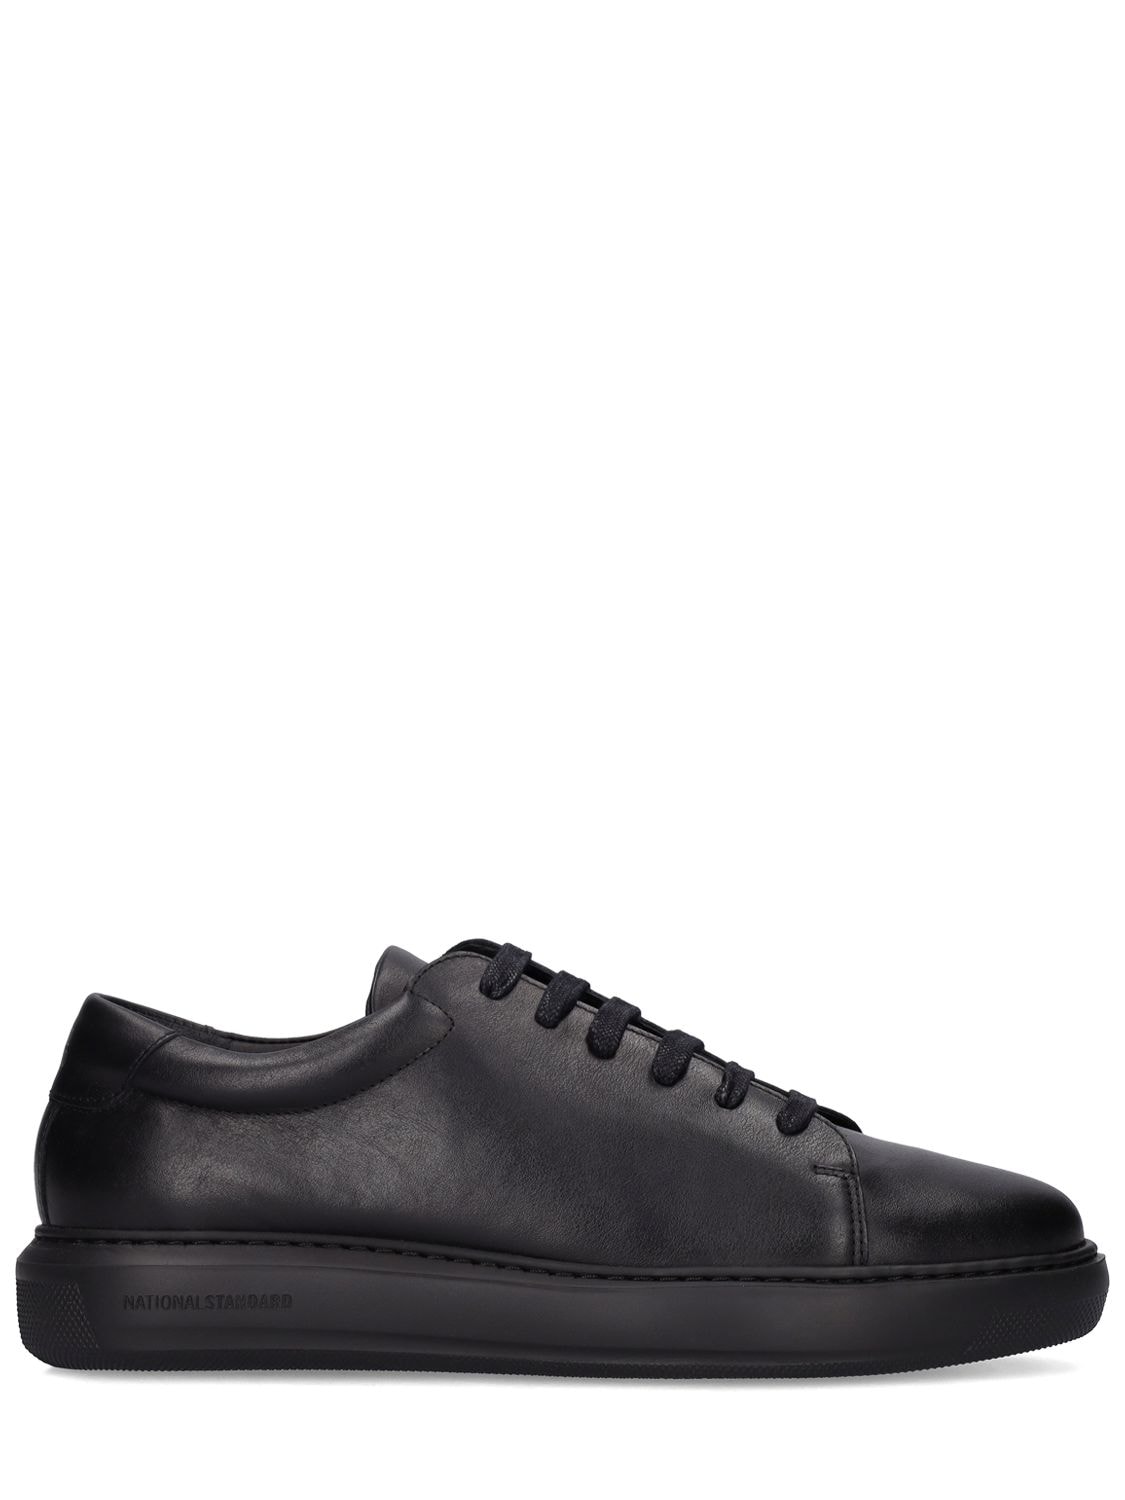 NATIONAL STANDARD Edition 3 Leather Low Sneakers